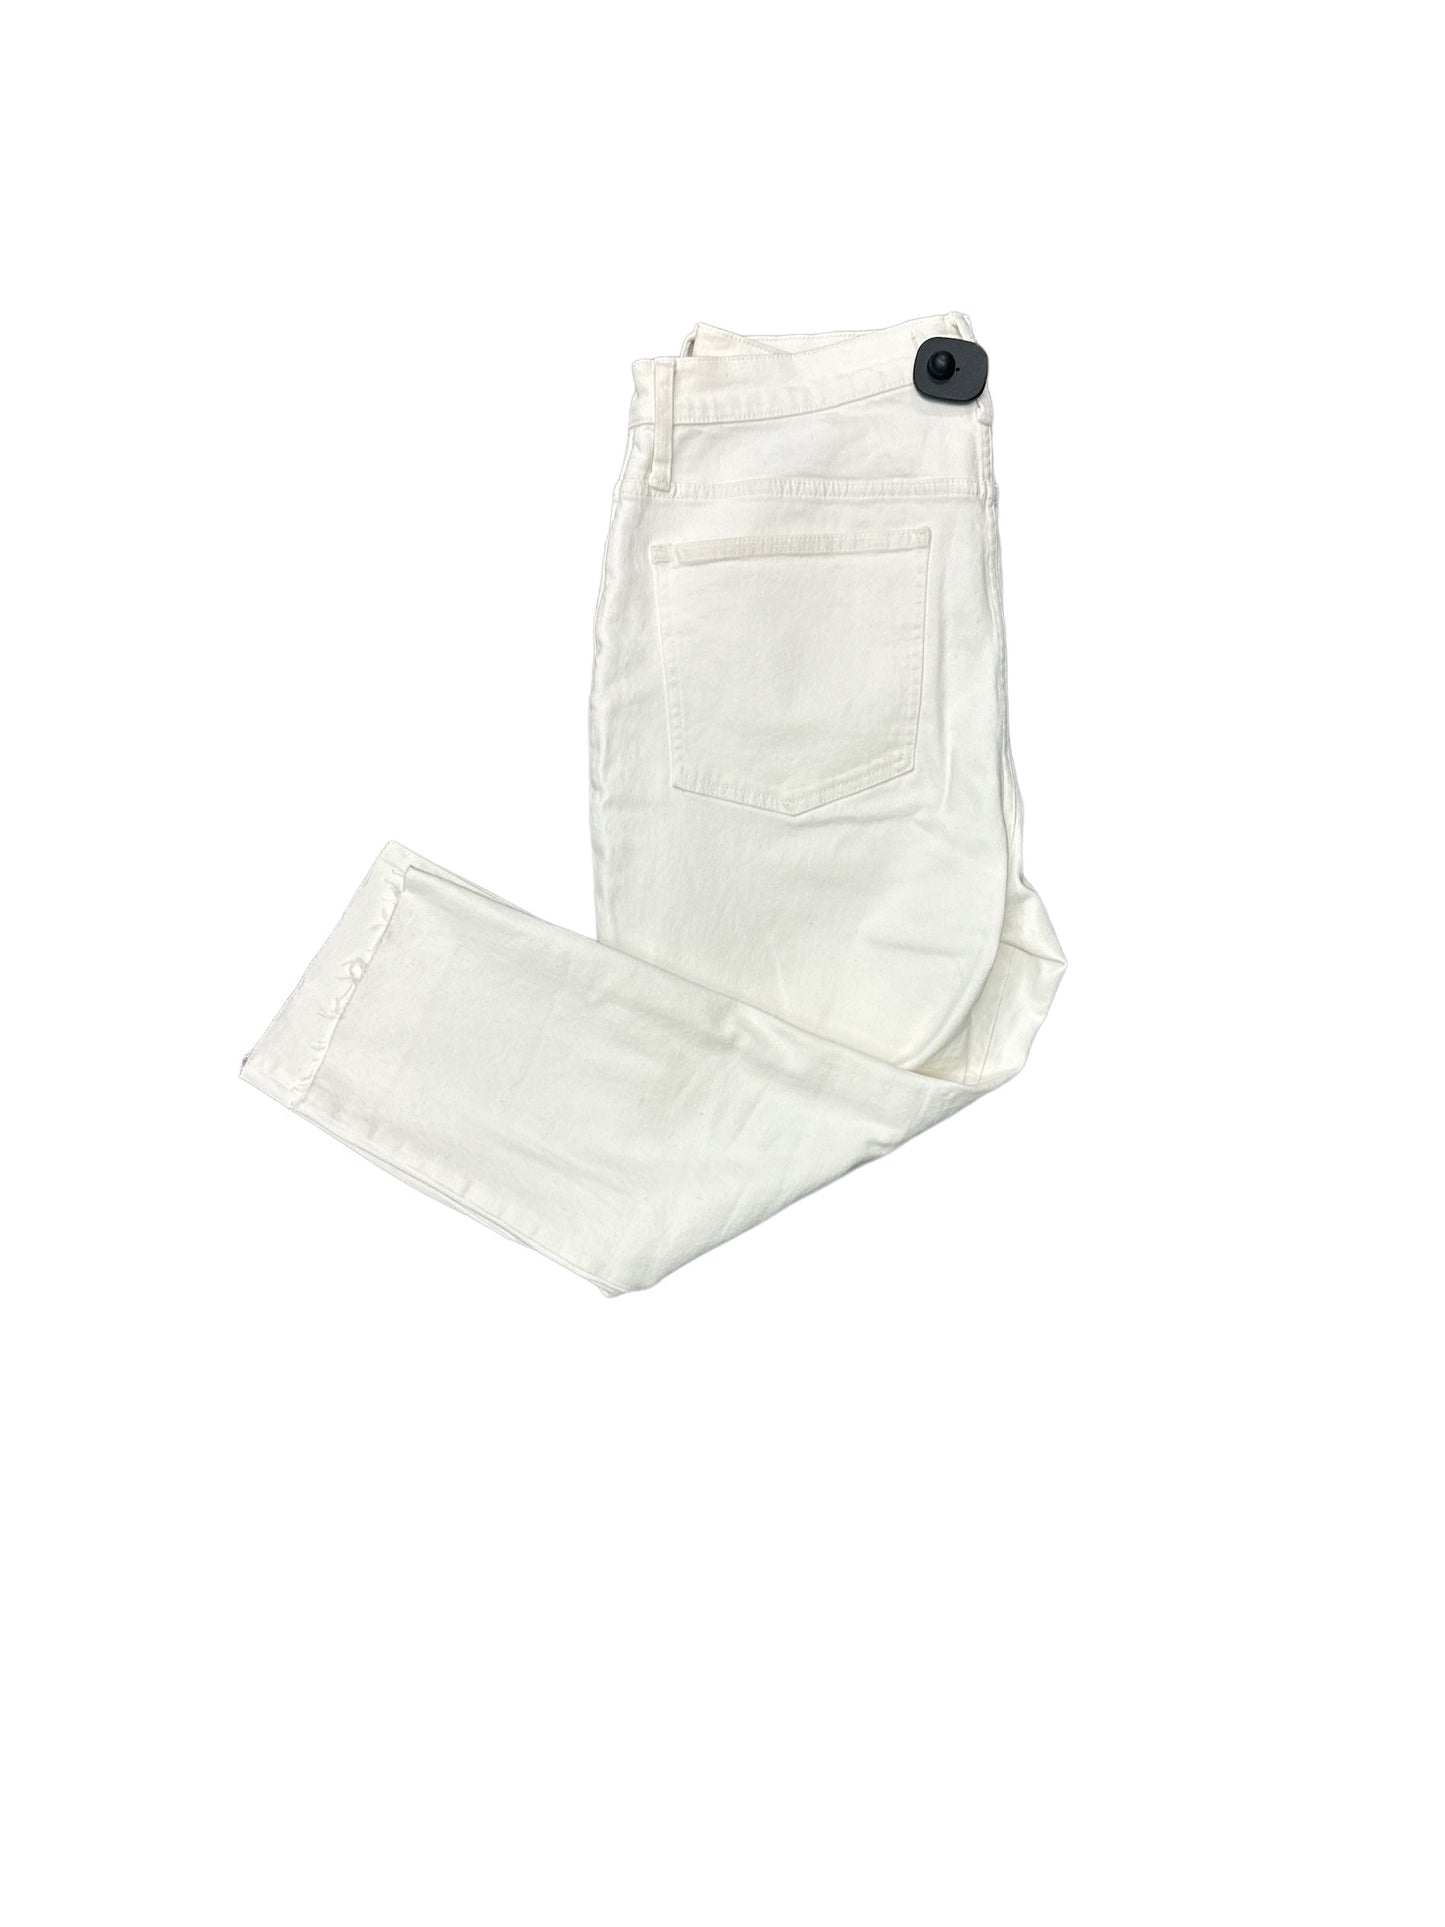 White Pants Cropped Madewell, Size 12